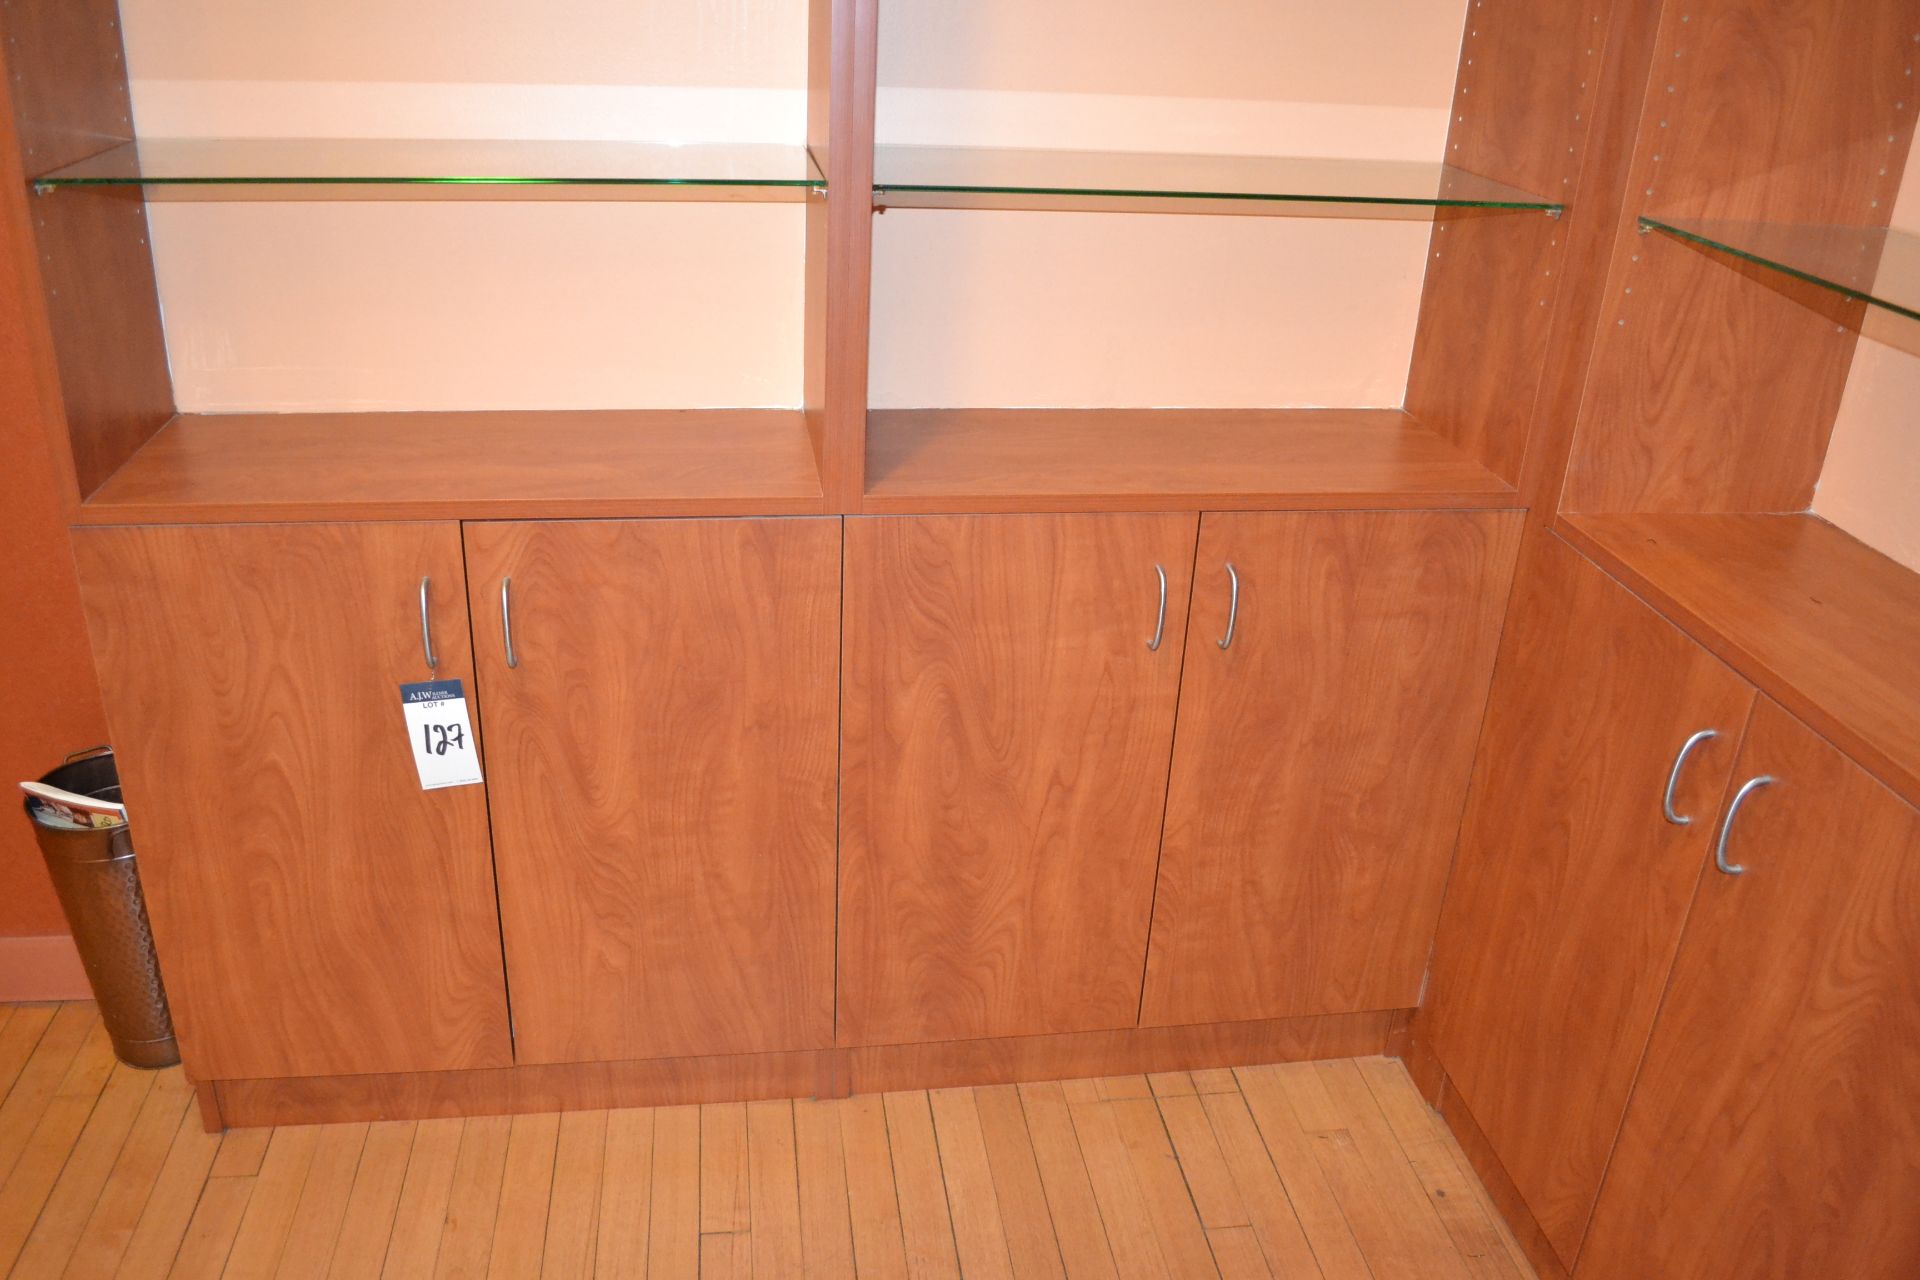 Cherry Formica Corner Shelving w/ Bottom Cabinets - Image 3 of 6